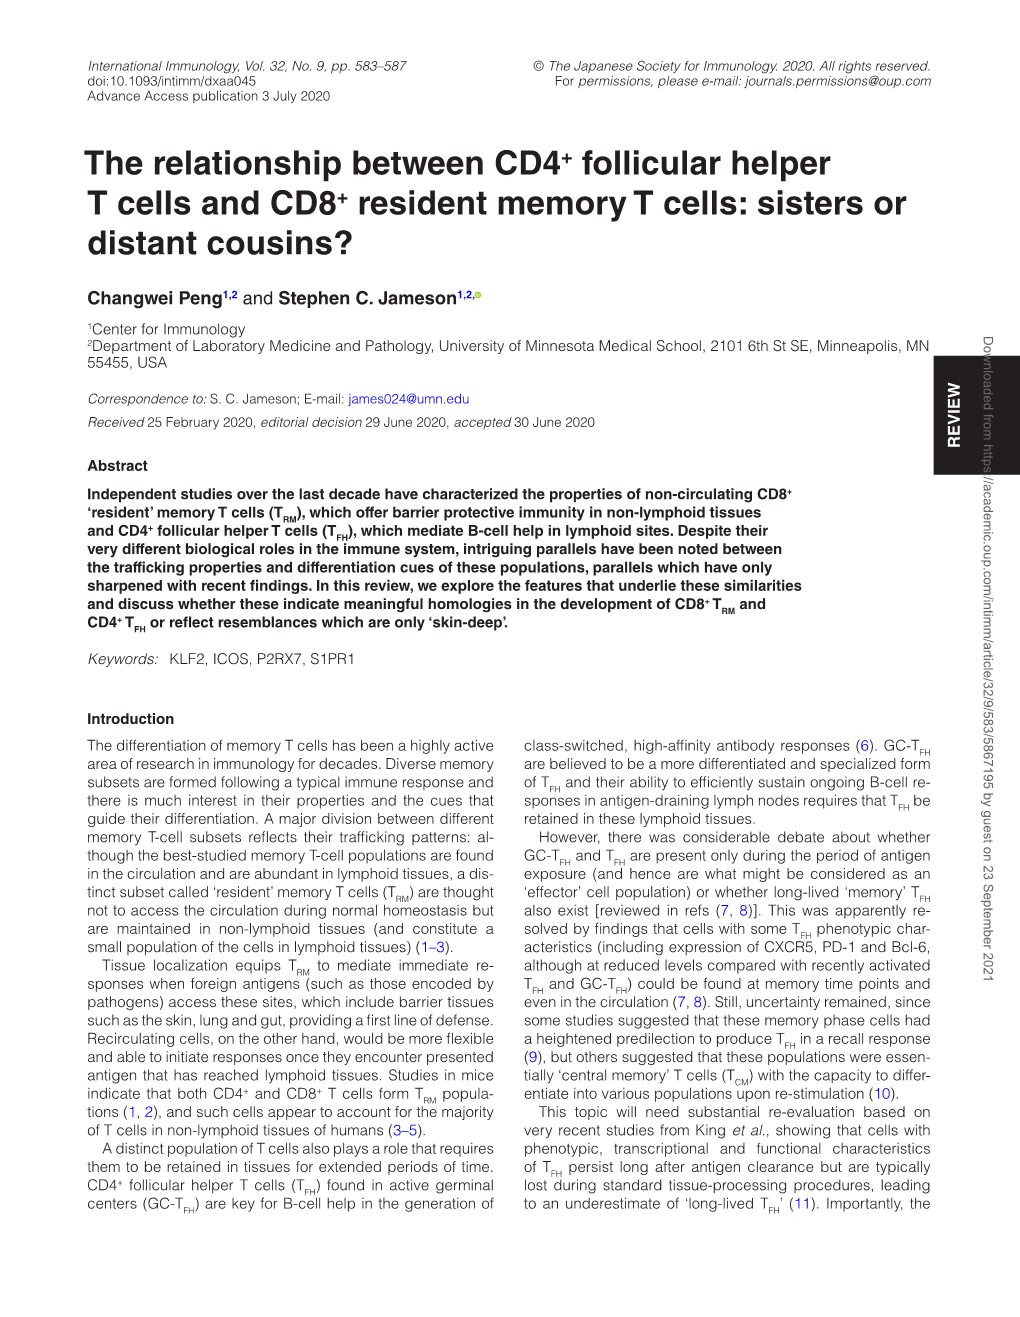 The Relationship Between CD4+ Follicular Helper T Cells and CD8+ Resident Memory T Cells